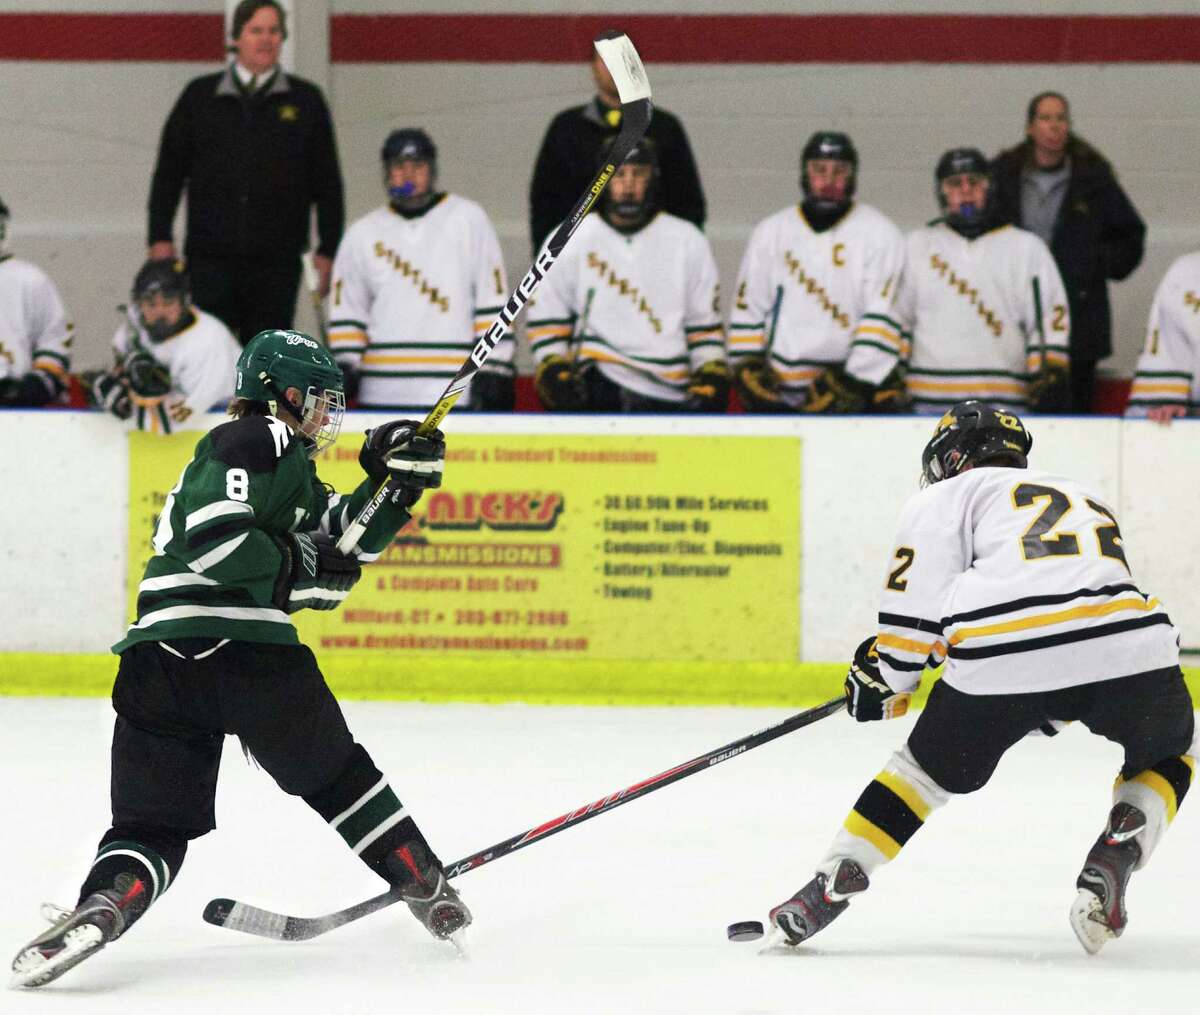 Blaine McMahon of the Green Wave fires a shot during New Milford High School ice hockey's Division II state tournament quarterfinal match vs. Amity Regional, March 2014